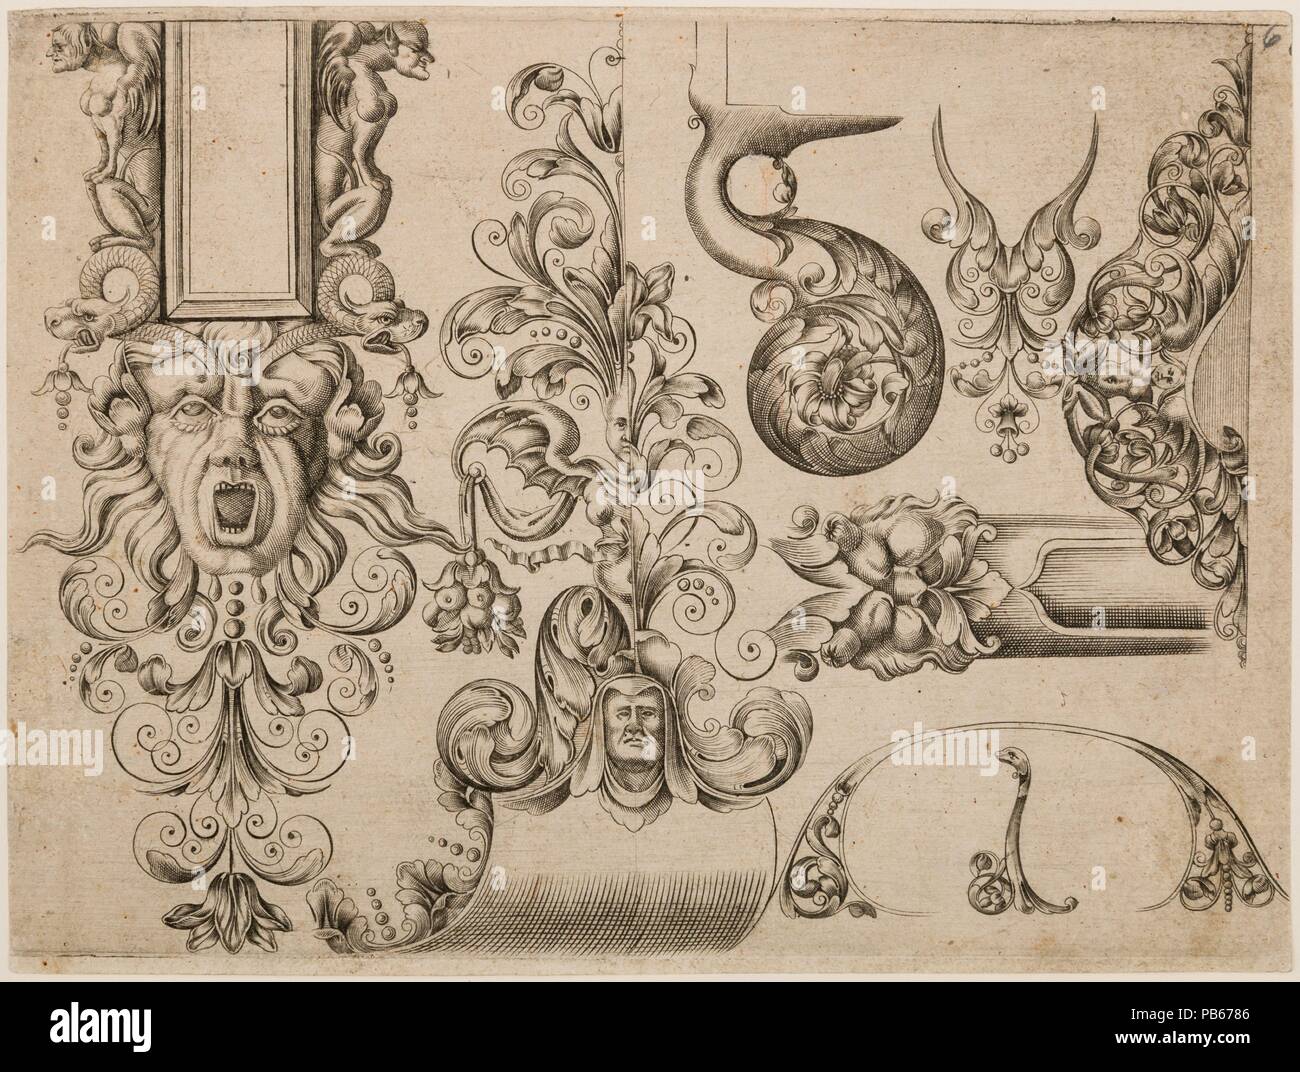 Plate Six from Plusieurs Models des plus nouuelles manieres qui sont en usage en l'Art de Arquebuzerie. Culture: French, Paris. Dimensions: Sheet: 7 1/16 x 5 3/8 in. (17.9 x 13.7 cm). Engraver: C. Jacquinet (French, Paris, active mid-17th century). Publisher: Thuraine (French, Paris, active mid-17th century); Le Hollandois (French, Paris, active mid-17th century). Date: ca. 1660.  Little is known about the royal gunmakers, Thuraine and Le Hollandois, who published the pattern book from which this sheet comes. It remains a rare and important document of Parisian gunmaking and the leading style  Stock Photo